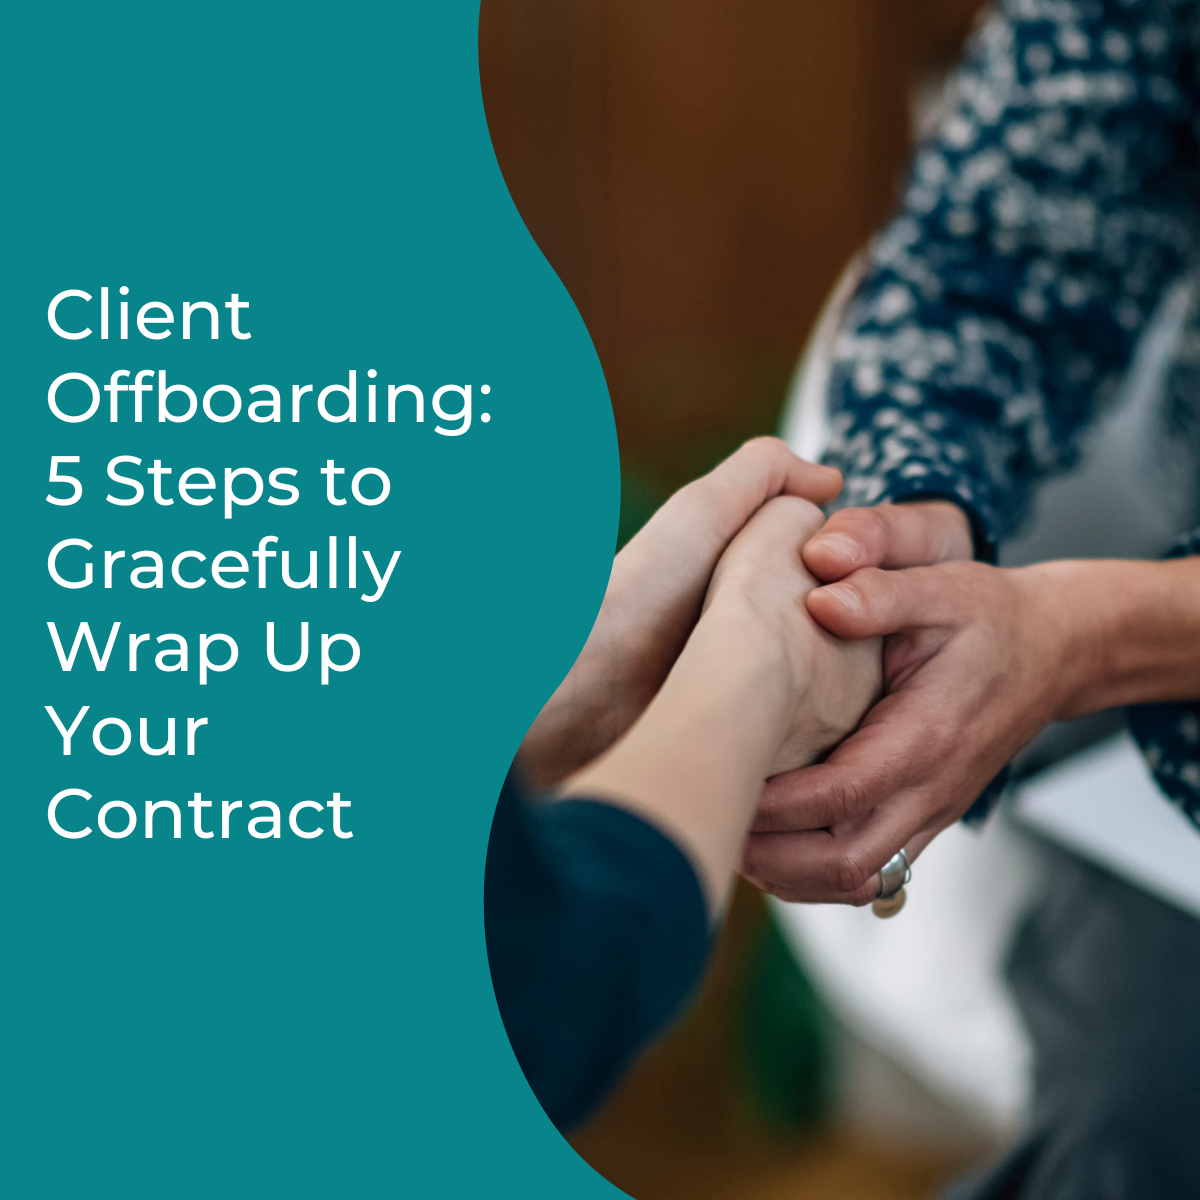 You are currently viewing Client Offboarding: 5 Steps to Gracefully Wrap Up Your Contract